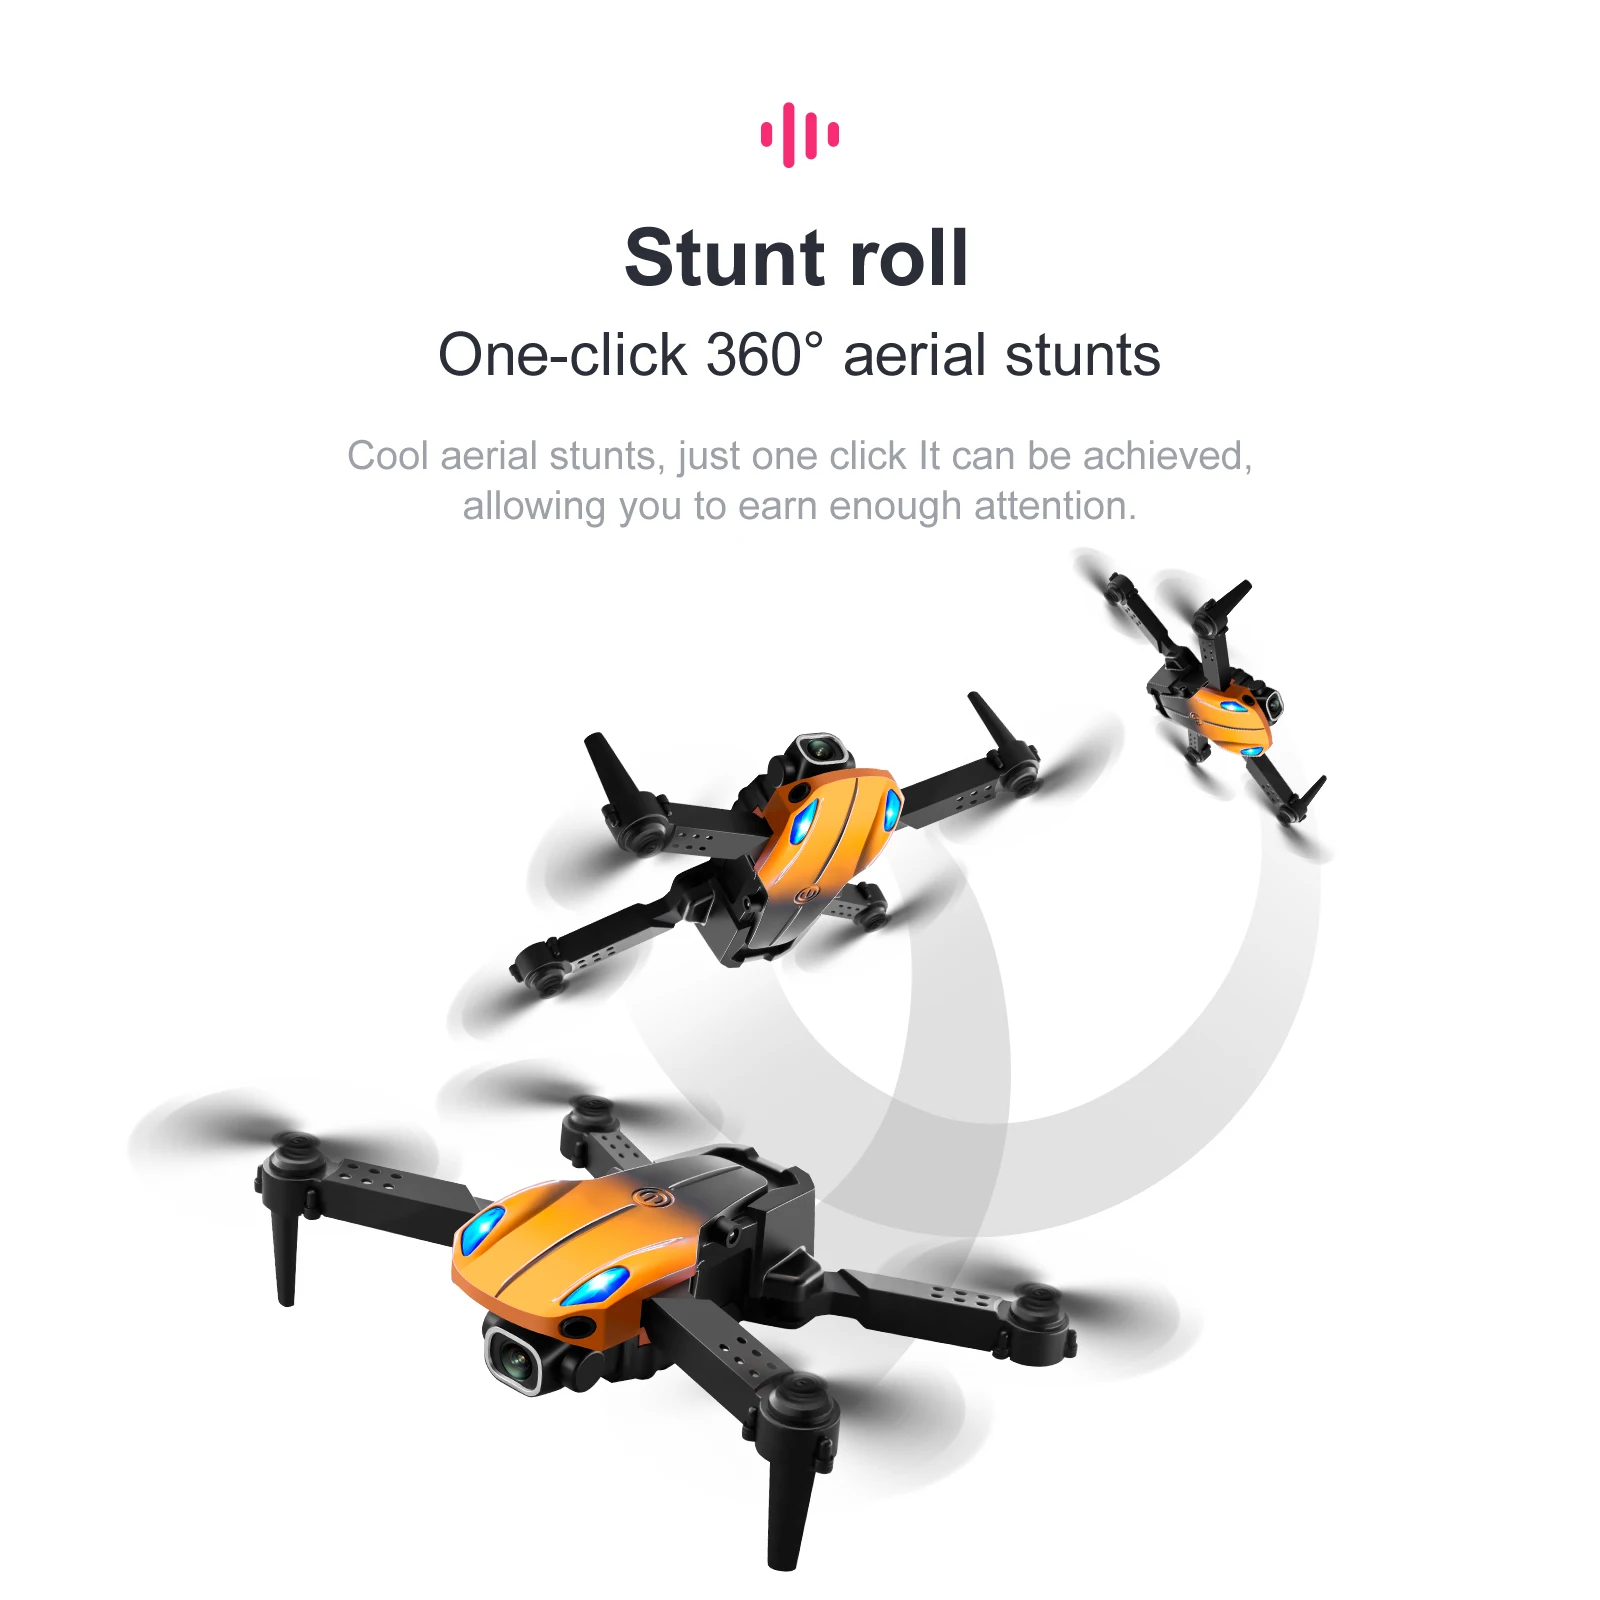 KY907 PRO Drone, stunt roll one-click 3609 aerial stunts, just one click